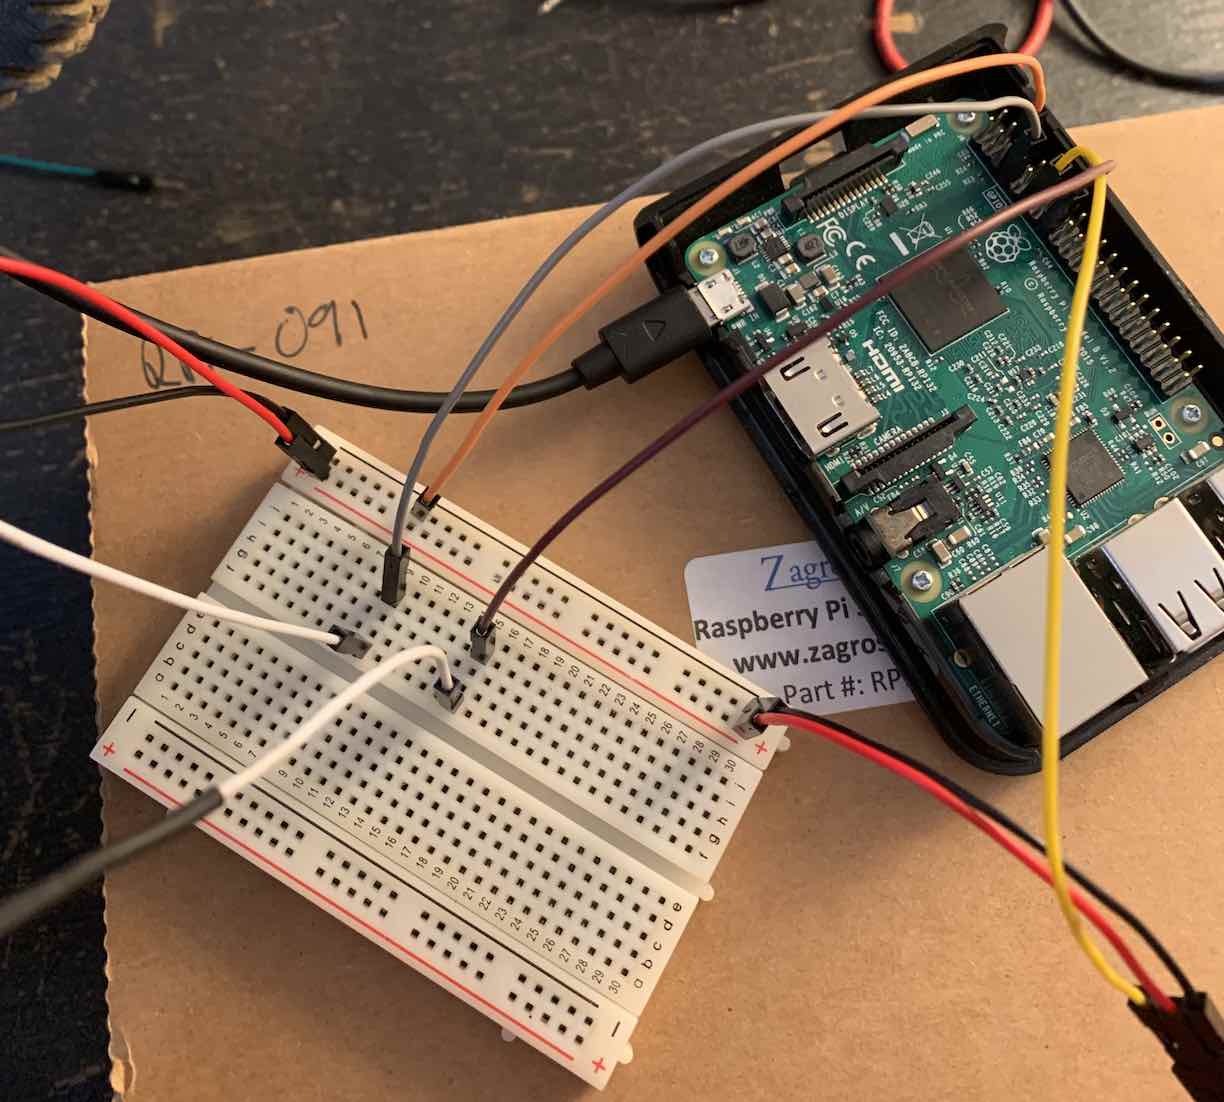 a raspberry pi and breadboard with cables all over the place